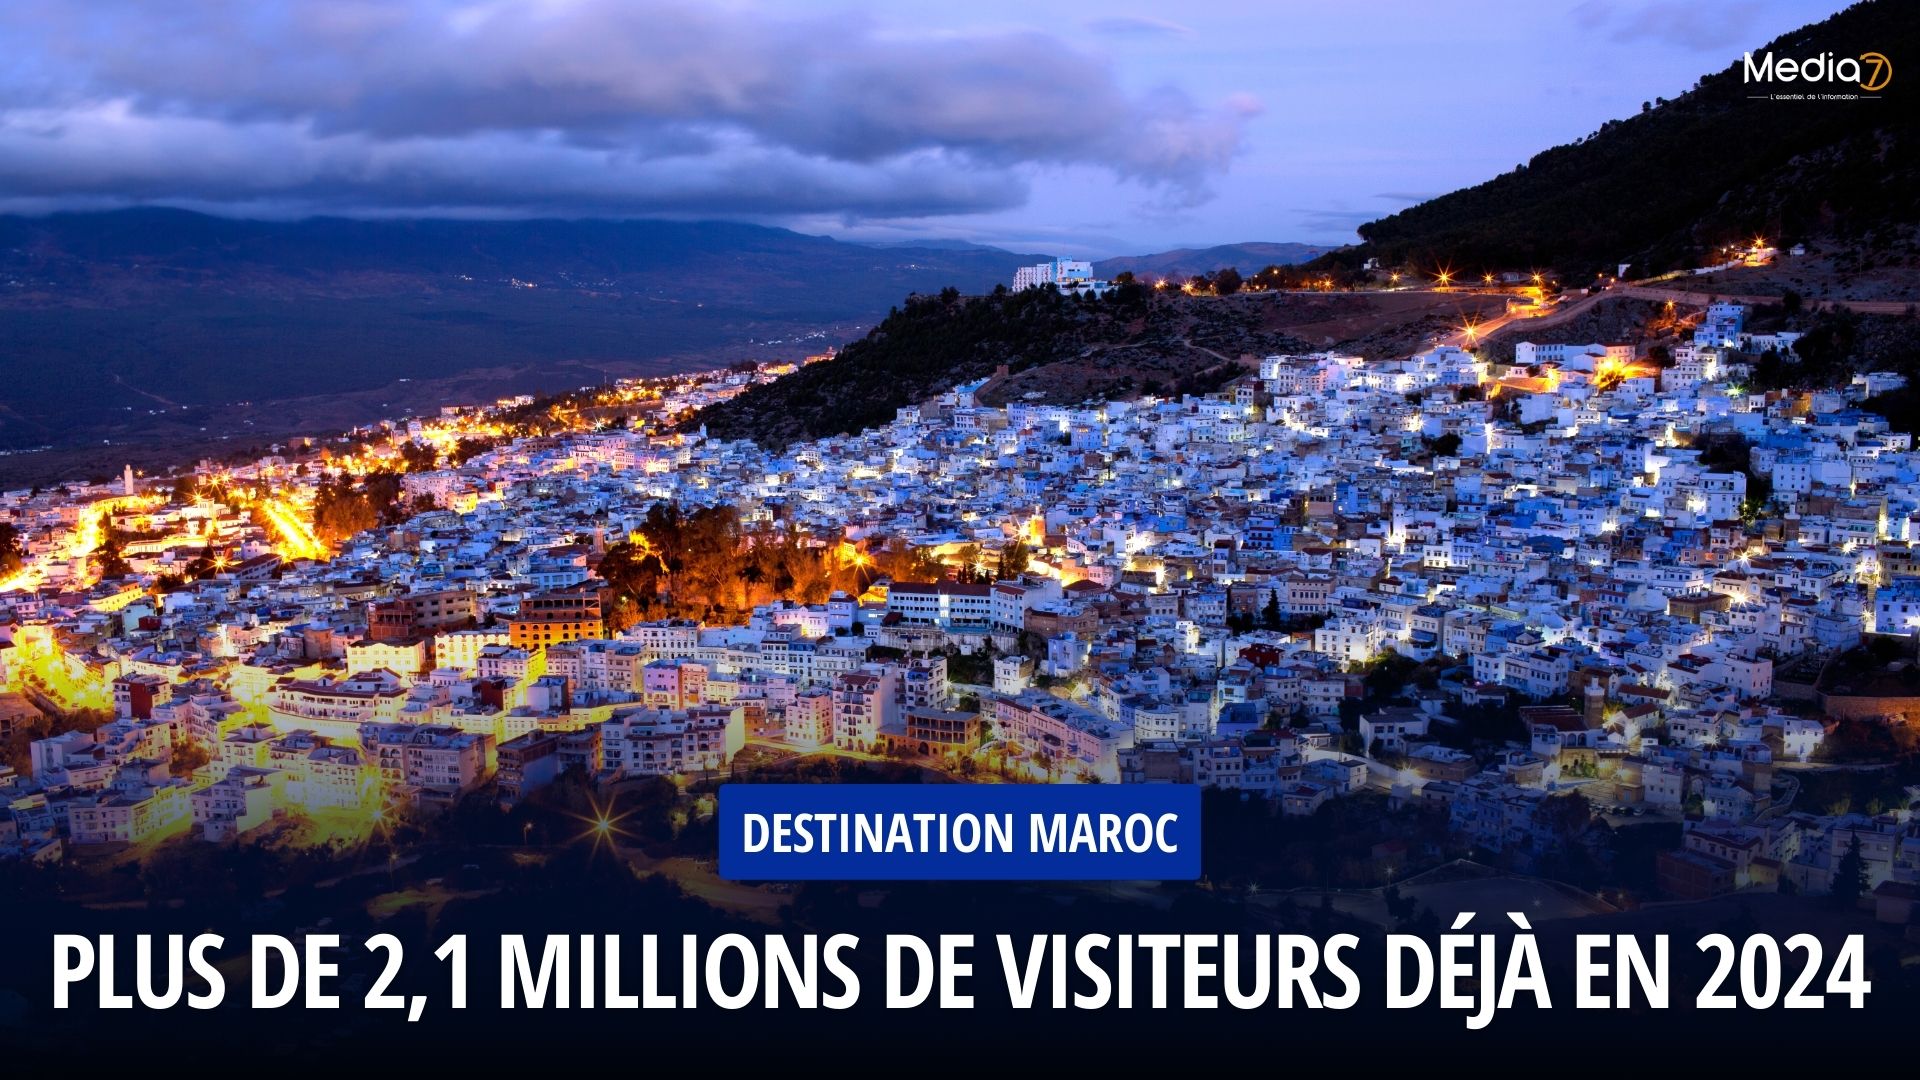 Destination Morocco: Tourist Affluence on the Rise with 2.1 Million Visitors